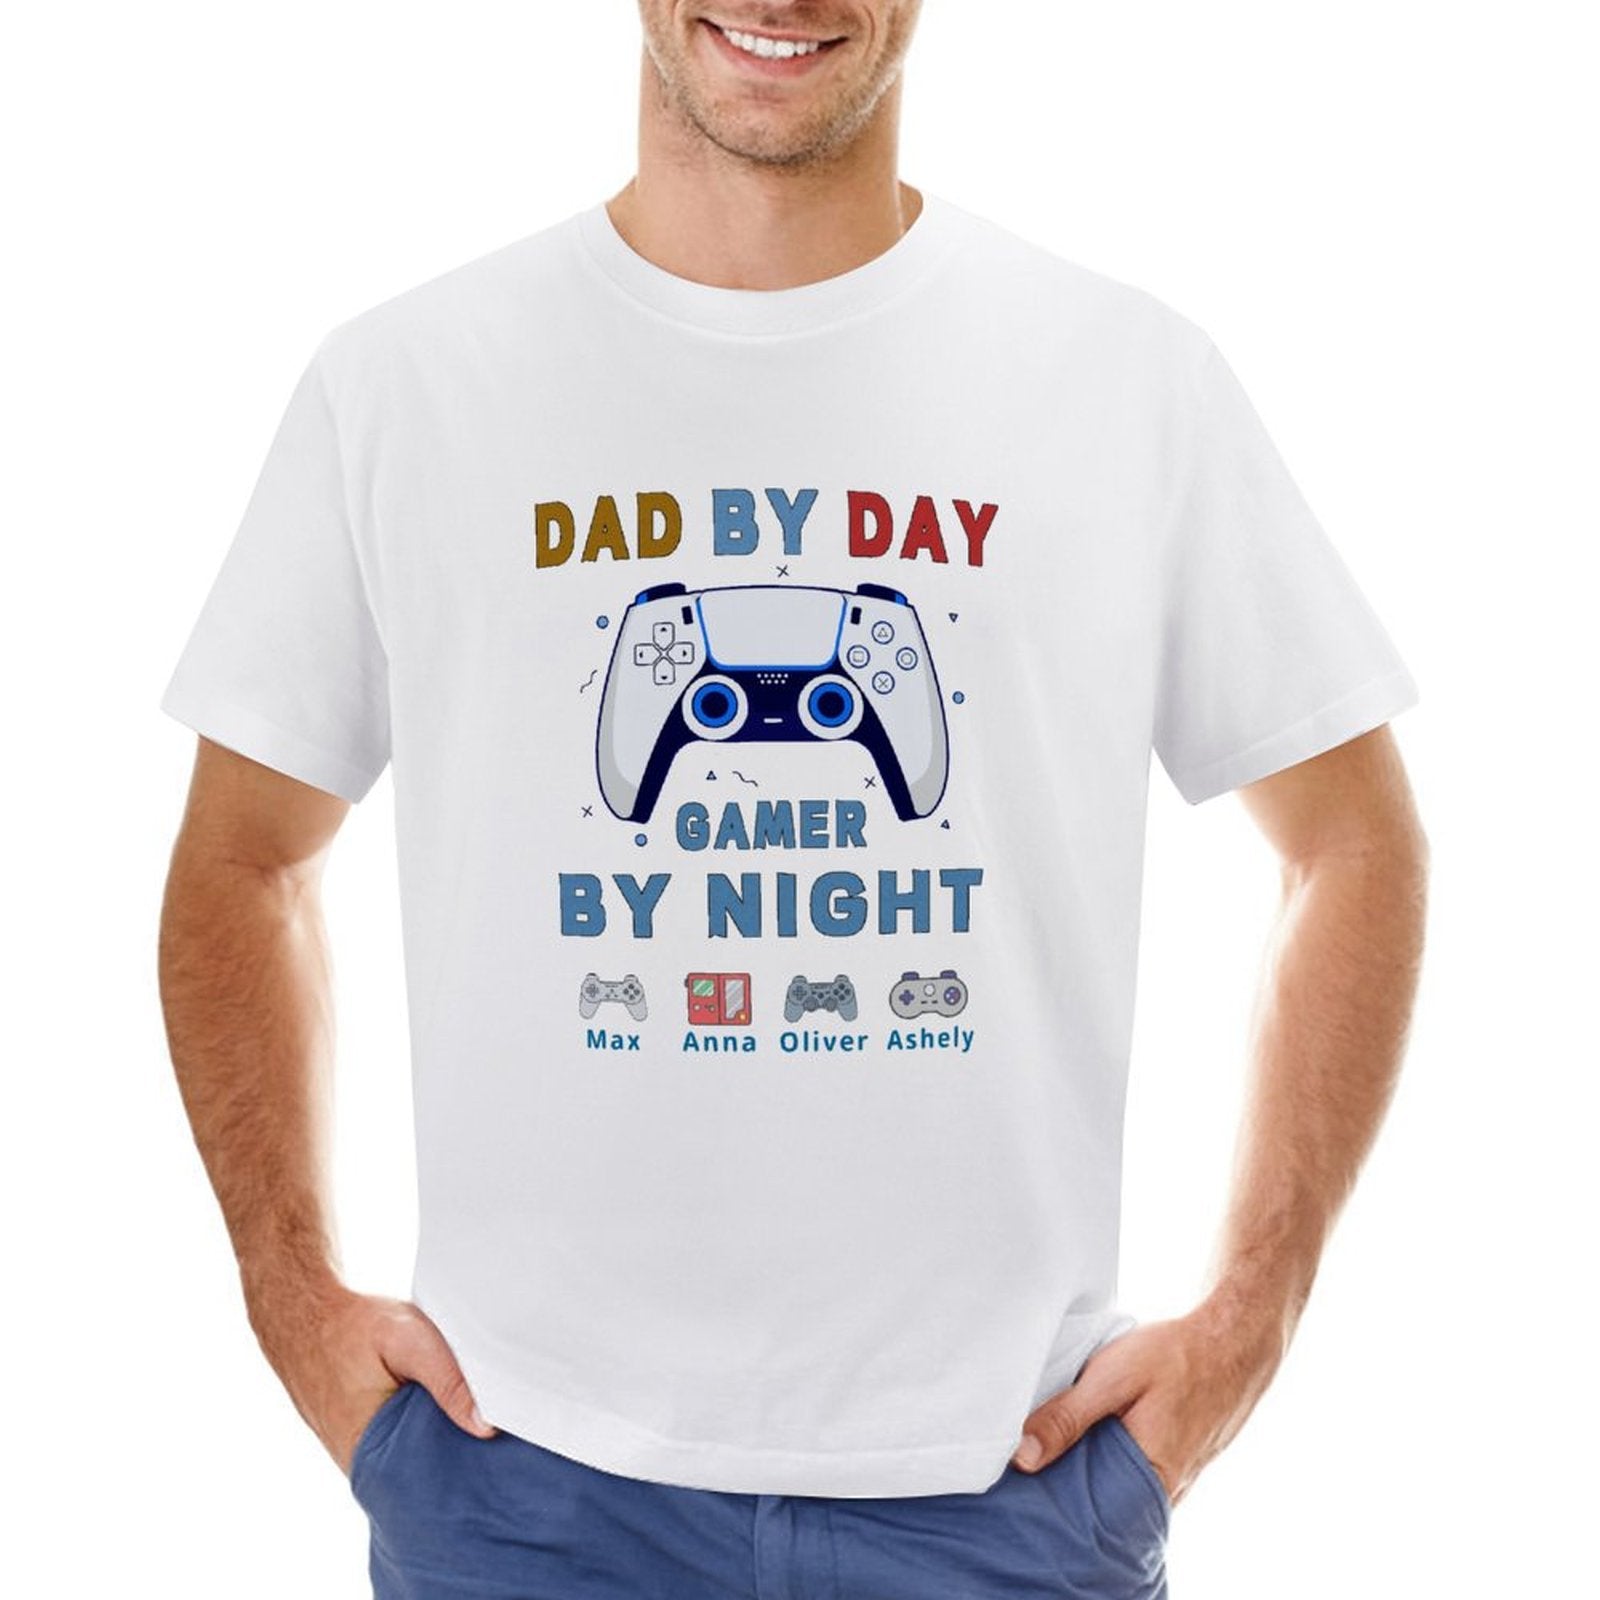 Custom Cartoon Game Boy T-Shirts, Personalized T-Shirts For Men, Father's Day Gift Shirts, Funny Dad Shirts, Custom Kids Name Shirts, Dad Gifts - colorfulcustom